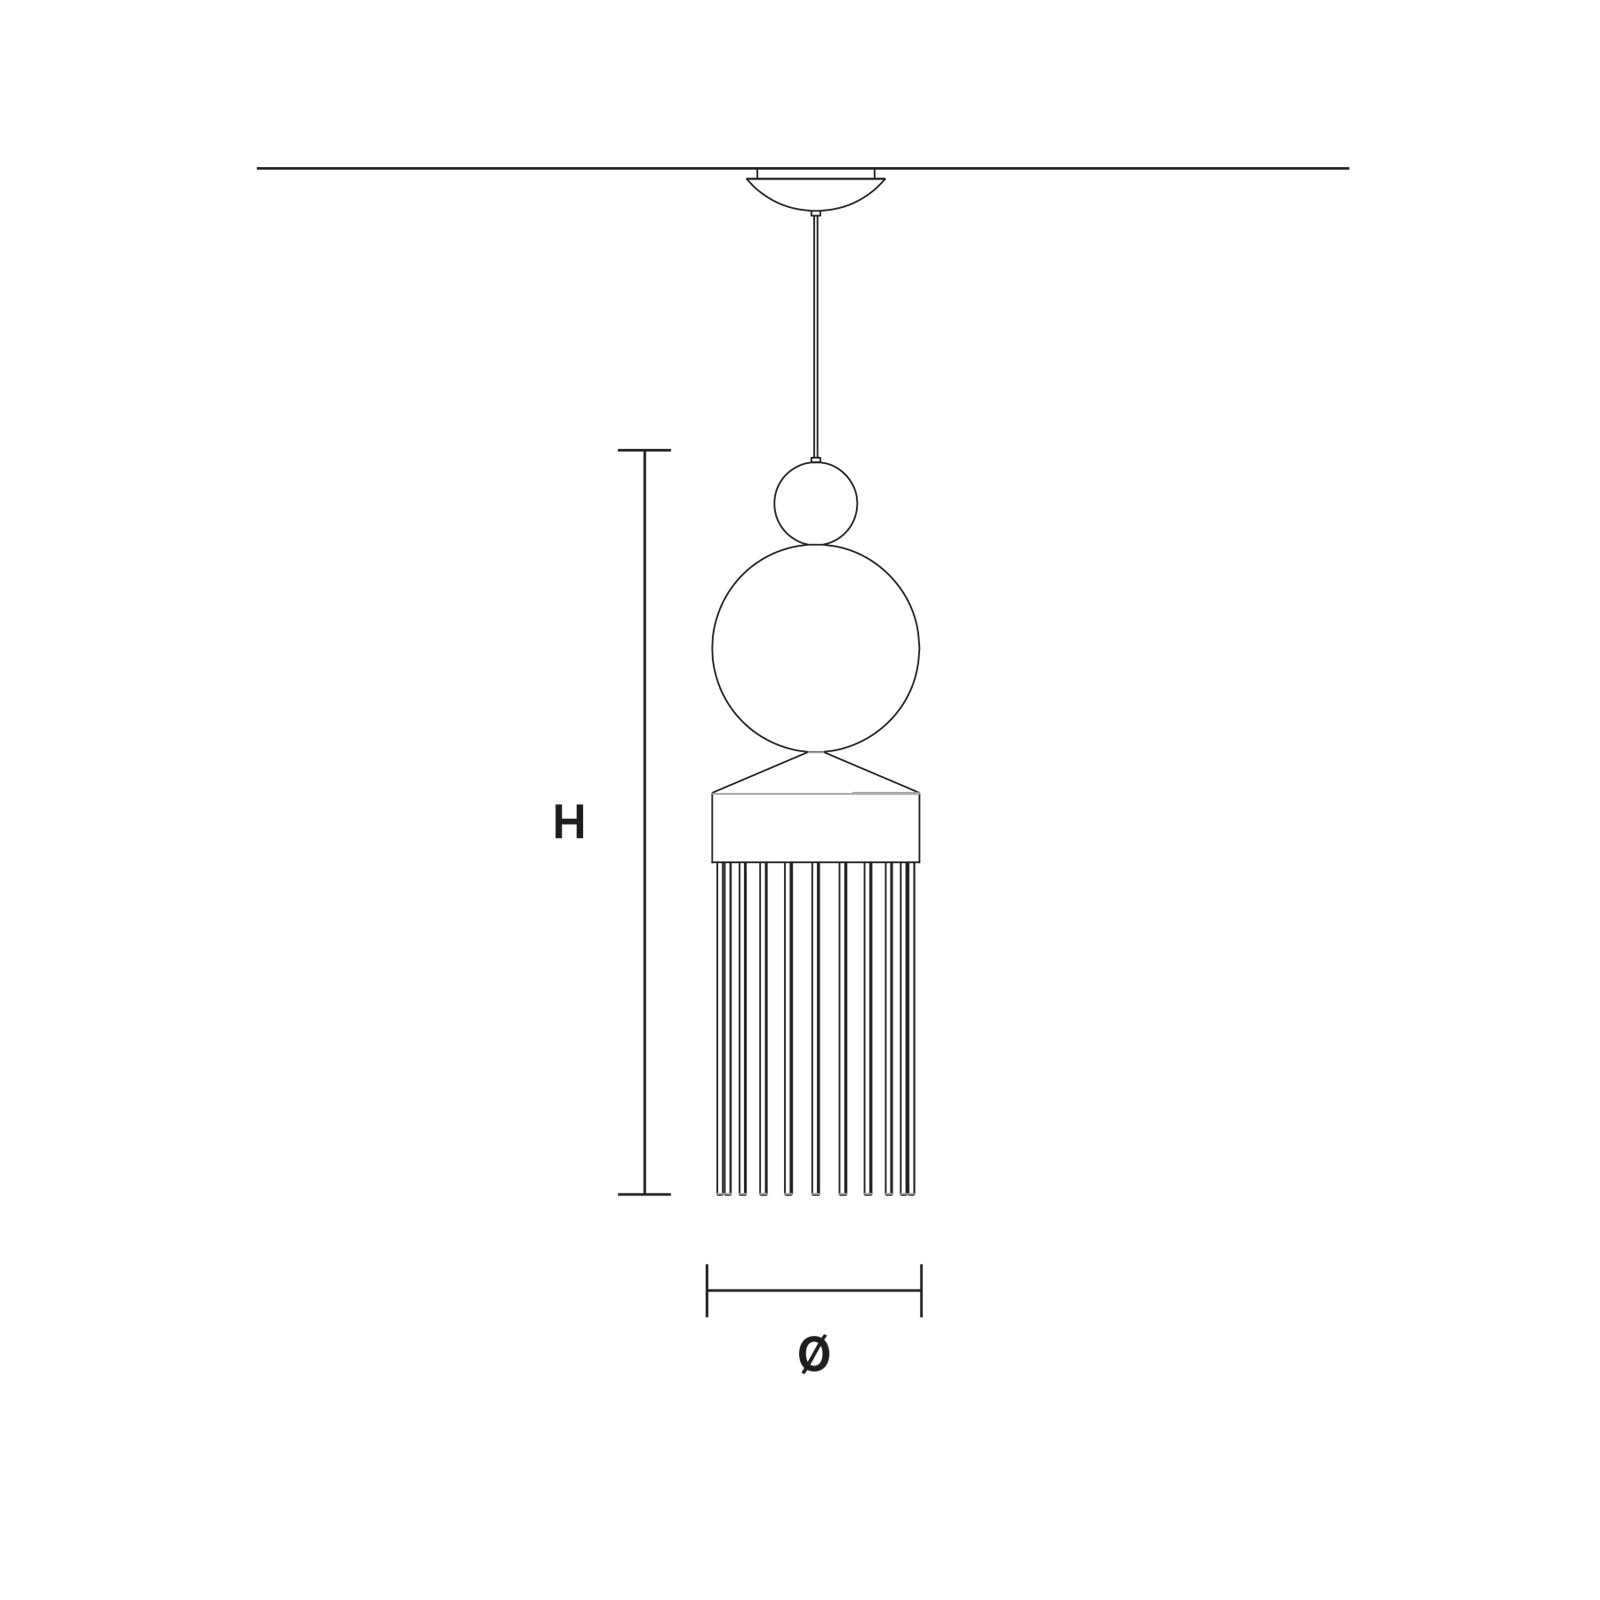 Nappe XL3 Pendant Lamp Specifications